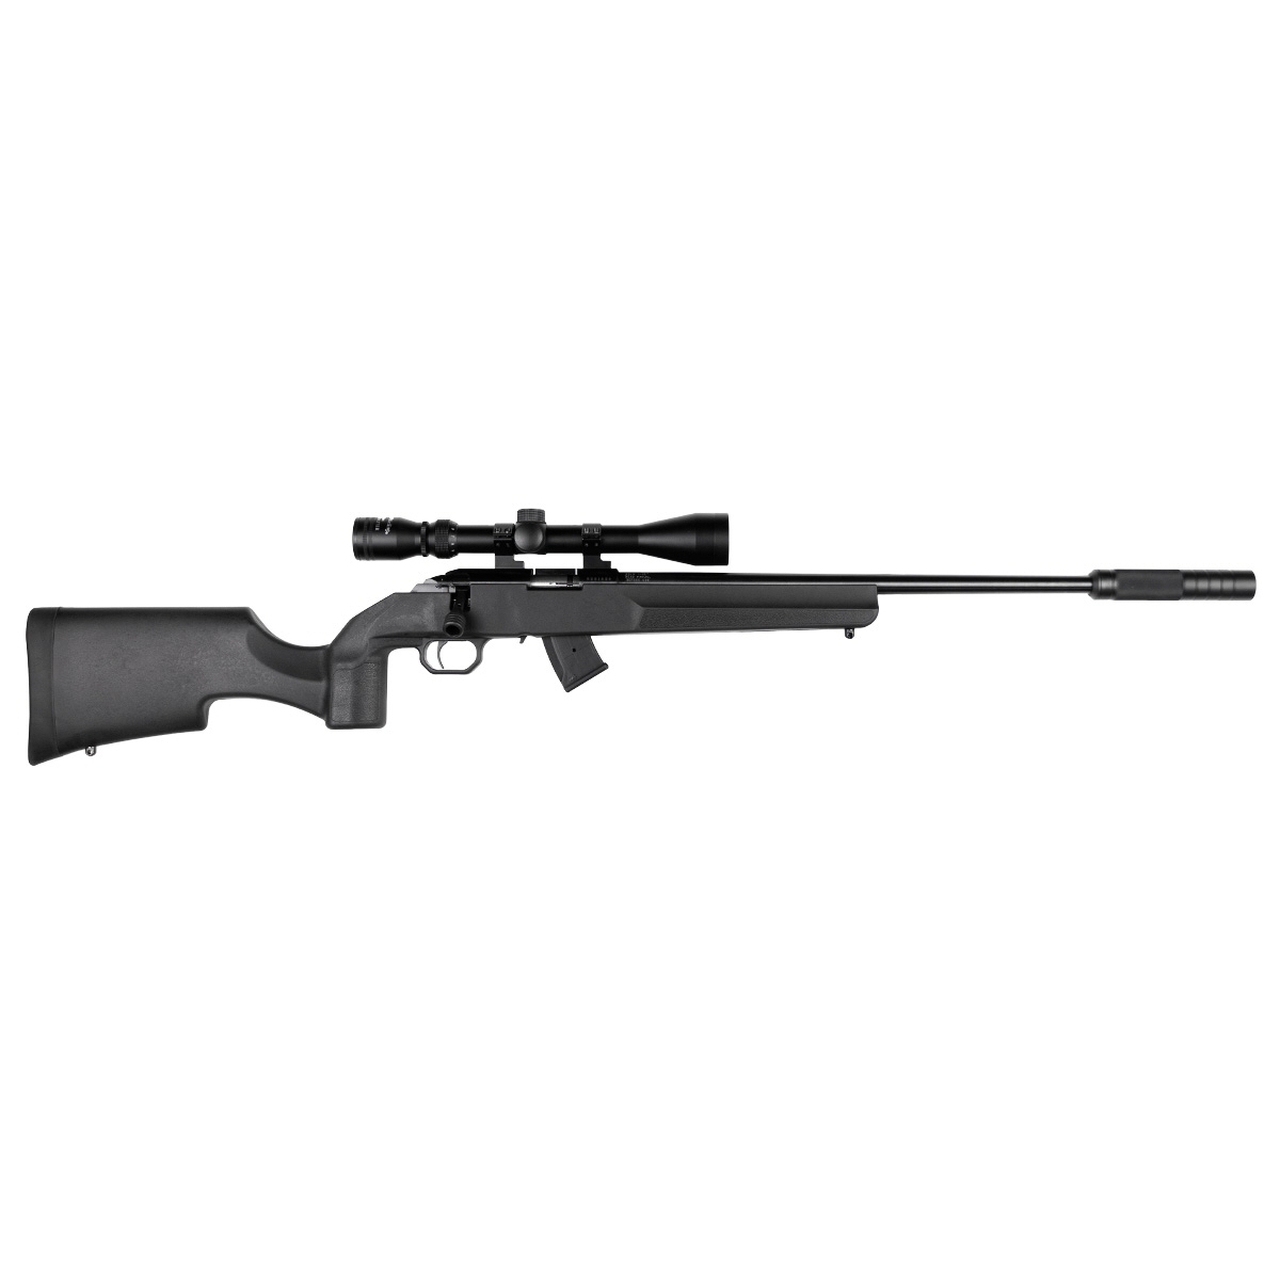 Howa M1100 22LR or 22WMR Scoped Suppressed Package